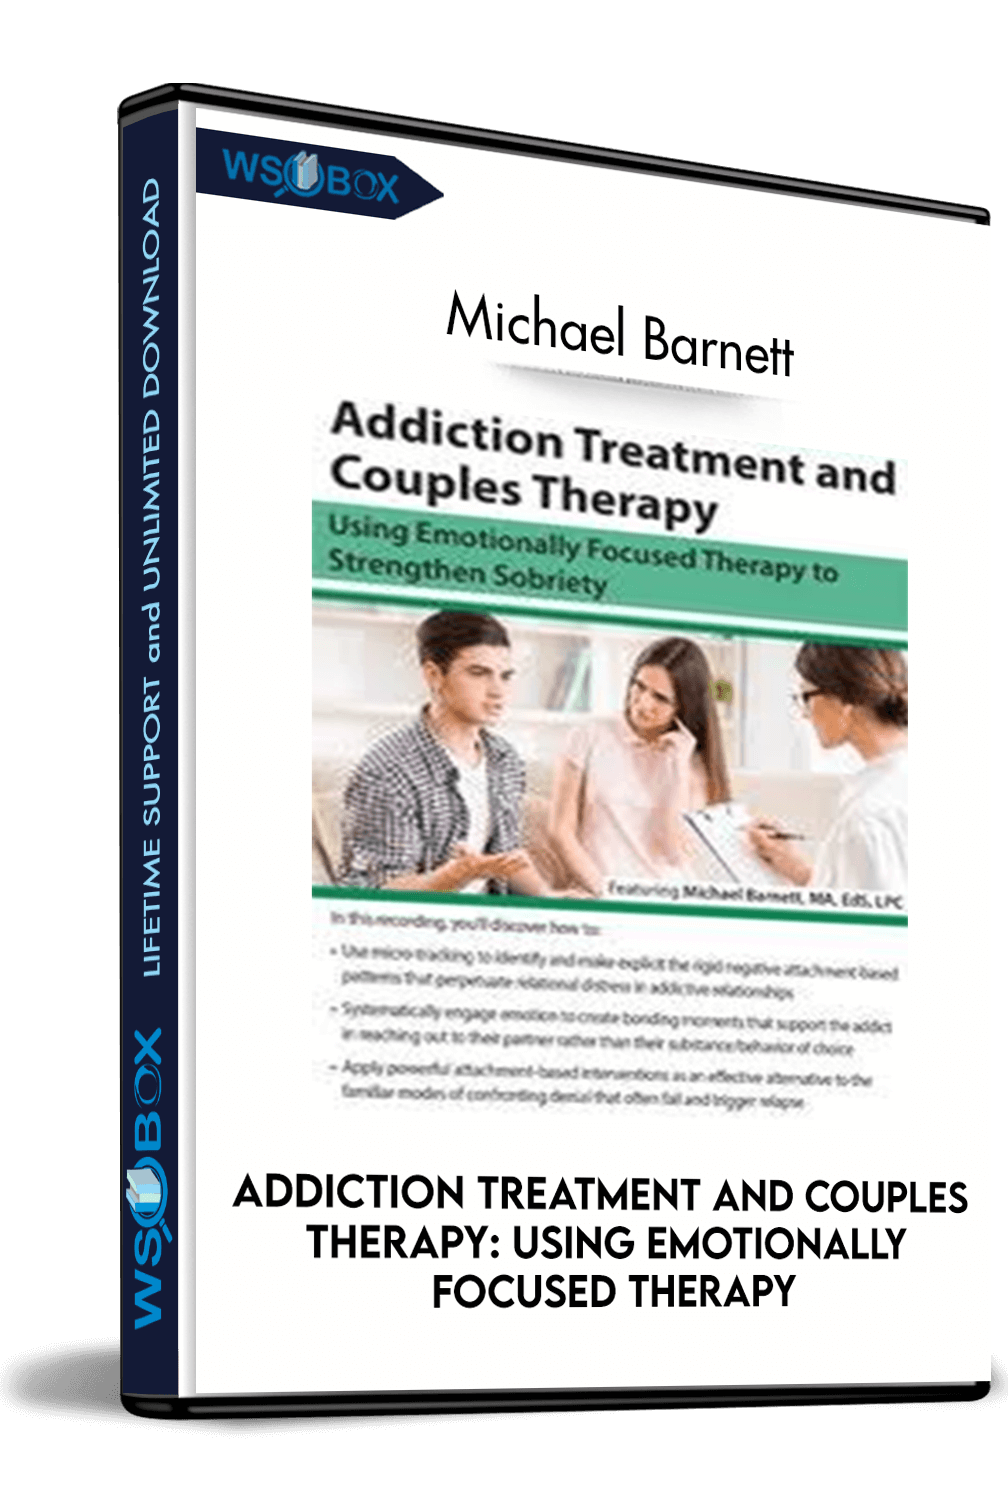 Addiction Treatment and Couples Therapy: Using Emotionally Focused Therapy to Strengthen SobrietyAddiction Treatment and Couples Therapy: Using Emotionally Focused Therapy to Strengthen Sobriety – Michael Barnett – Michael Barnett